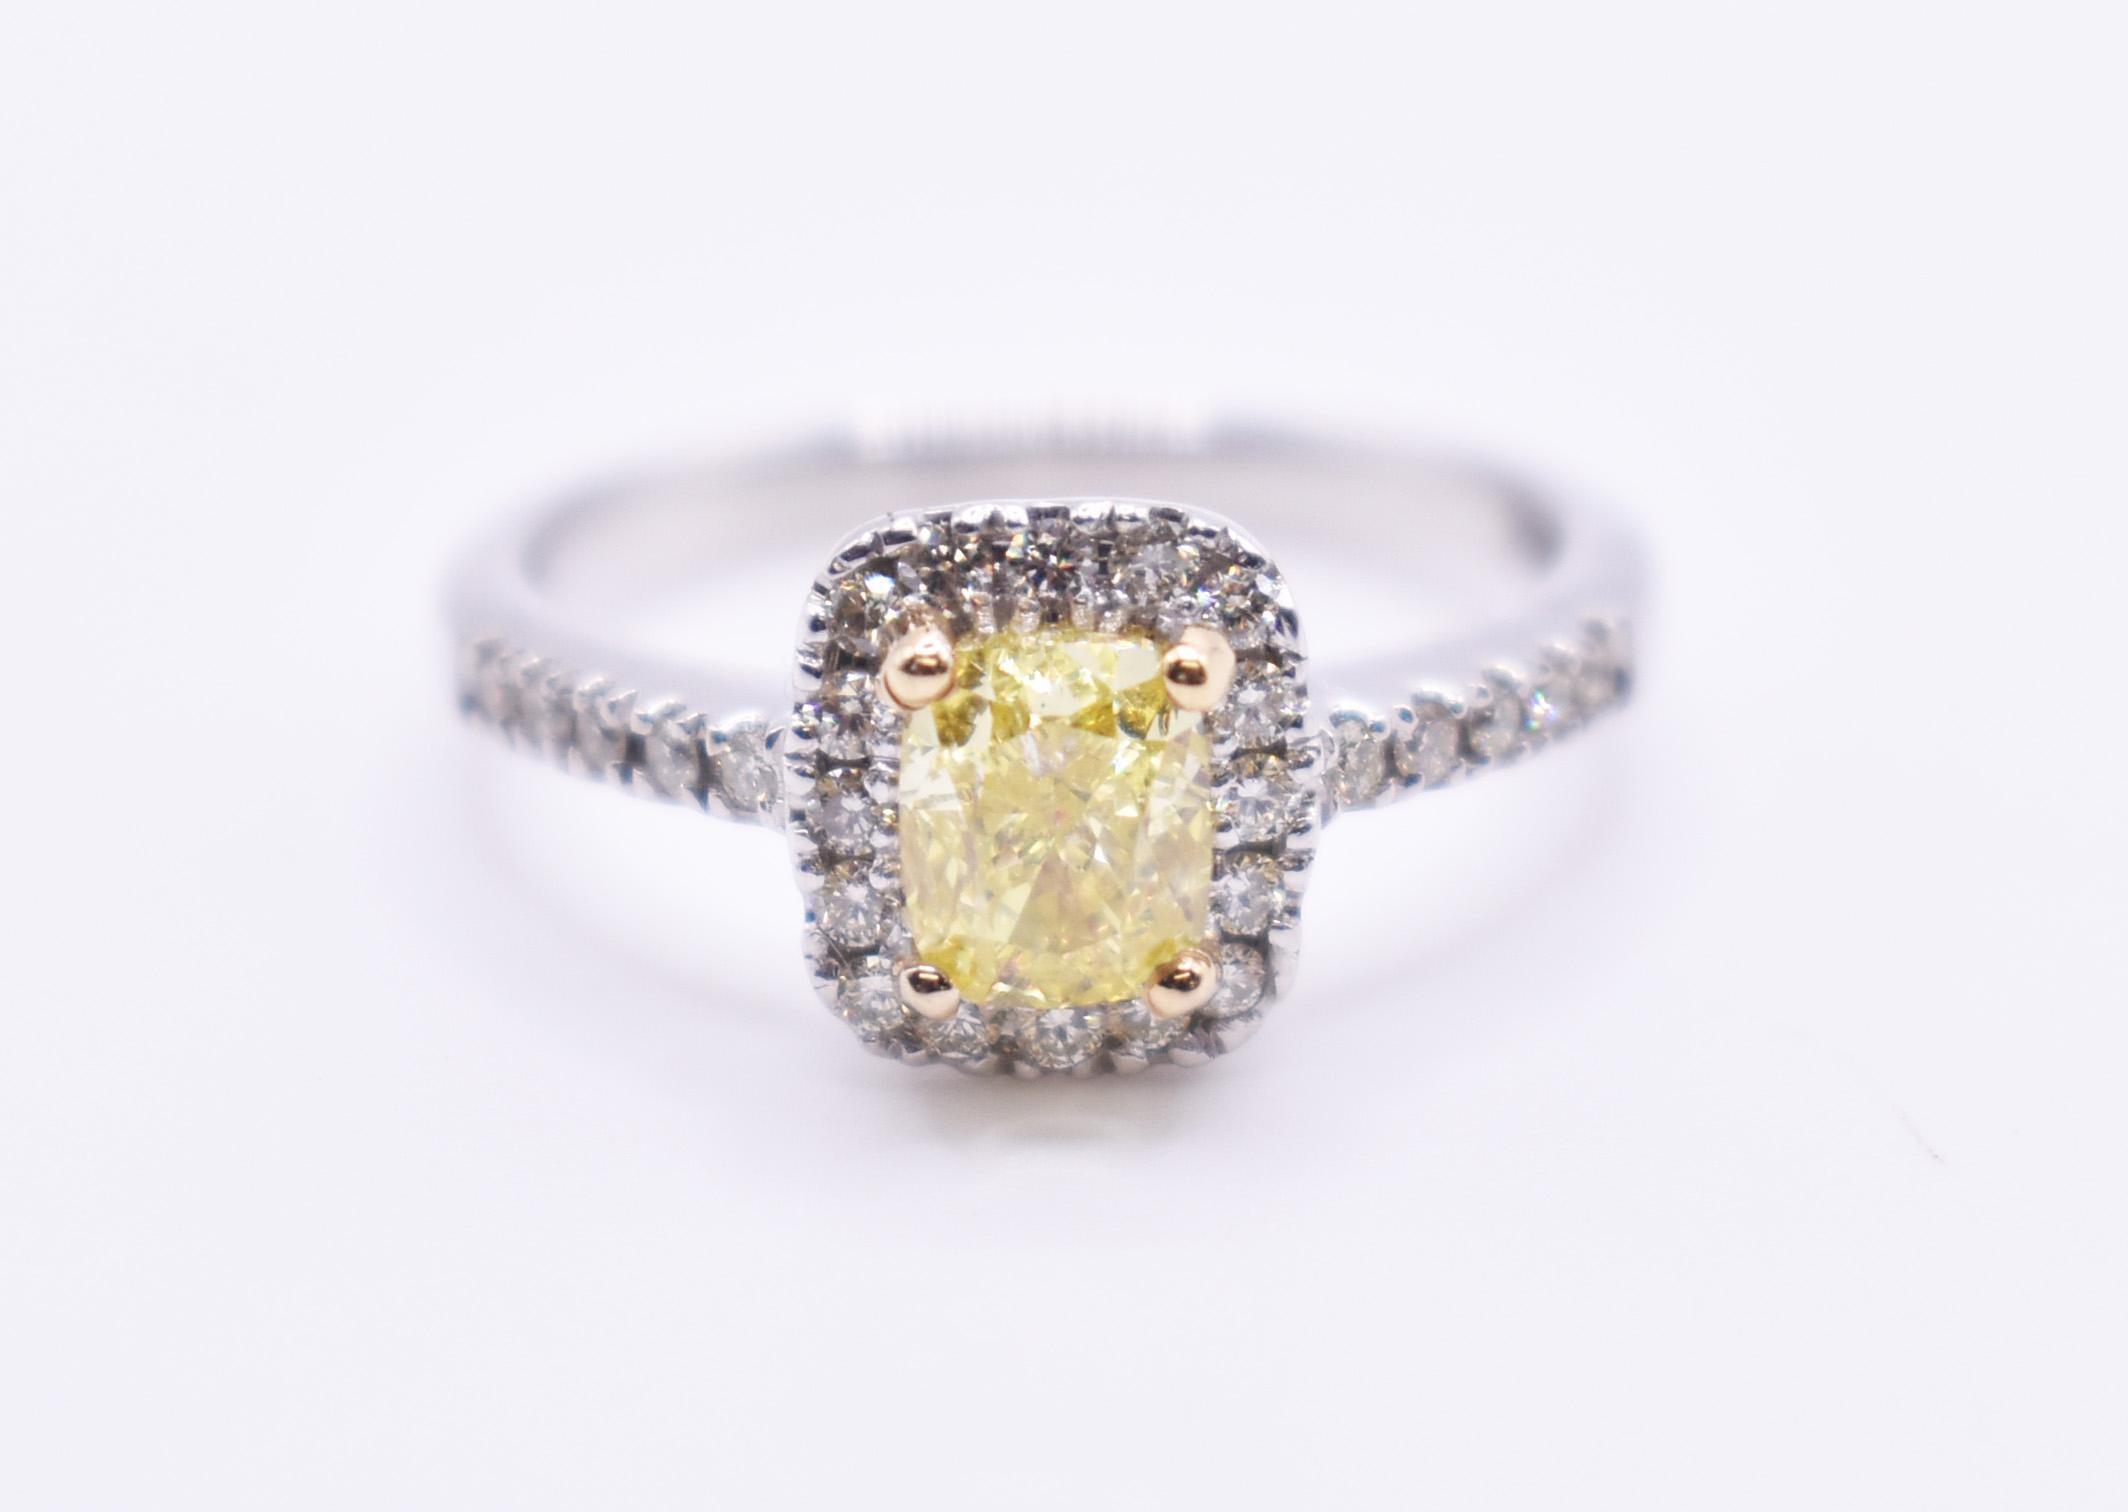 On offer for sale is an exquisite GIA certified 1ct fancy intense yellow diamond halo engagement ring, having a 1ct cushion cut fancy intense yelow diamond to the centre, surrounded by a halo of of round cut diamonds, with pave sides. 

Metal: 18k